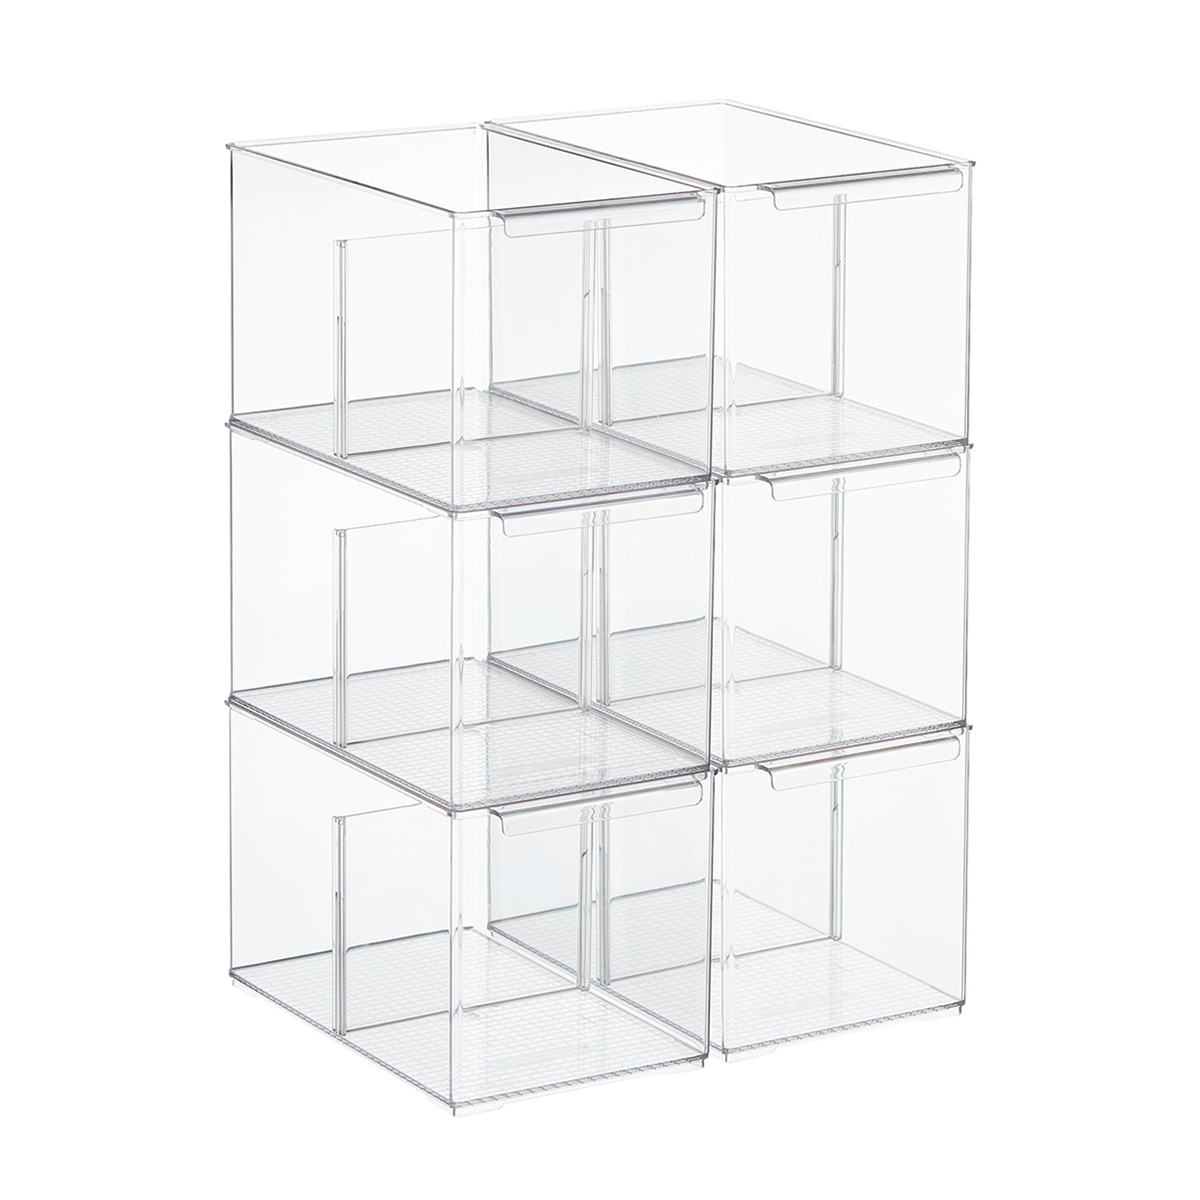 https://www.containerstore.com/catalogimages/448065/10089875_The_Container_Store_Cabinet.jpg